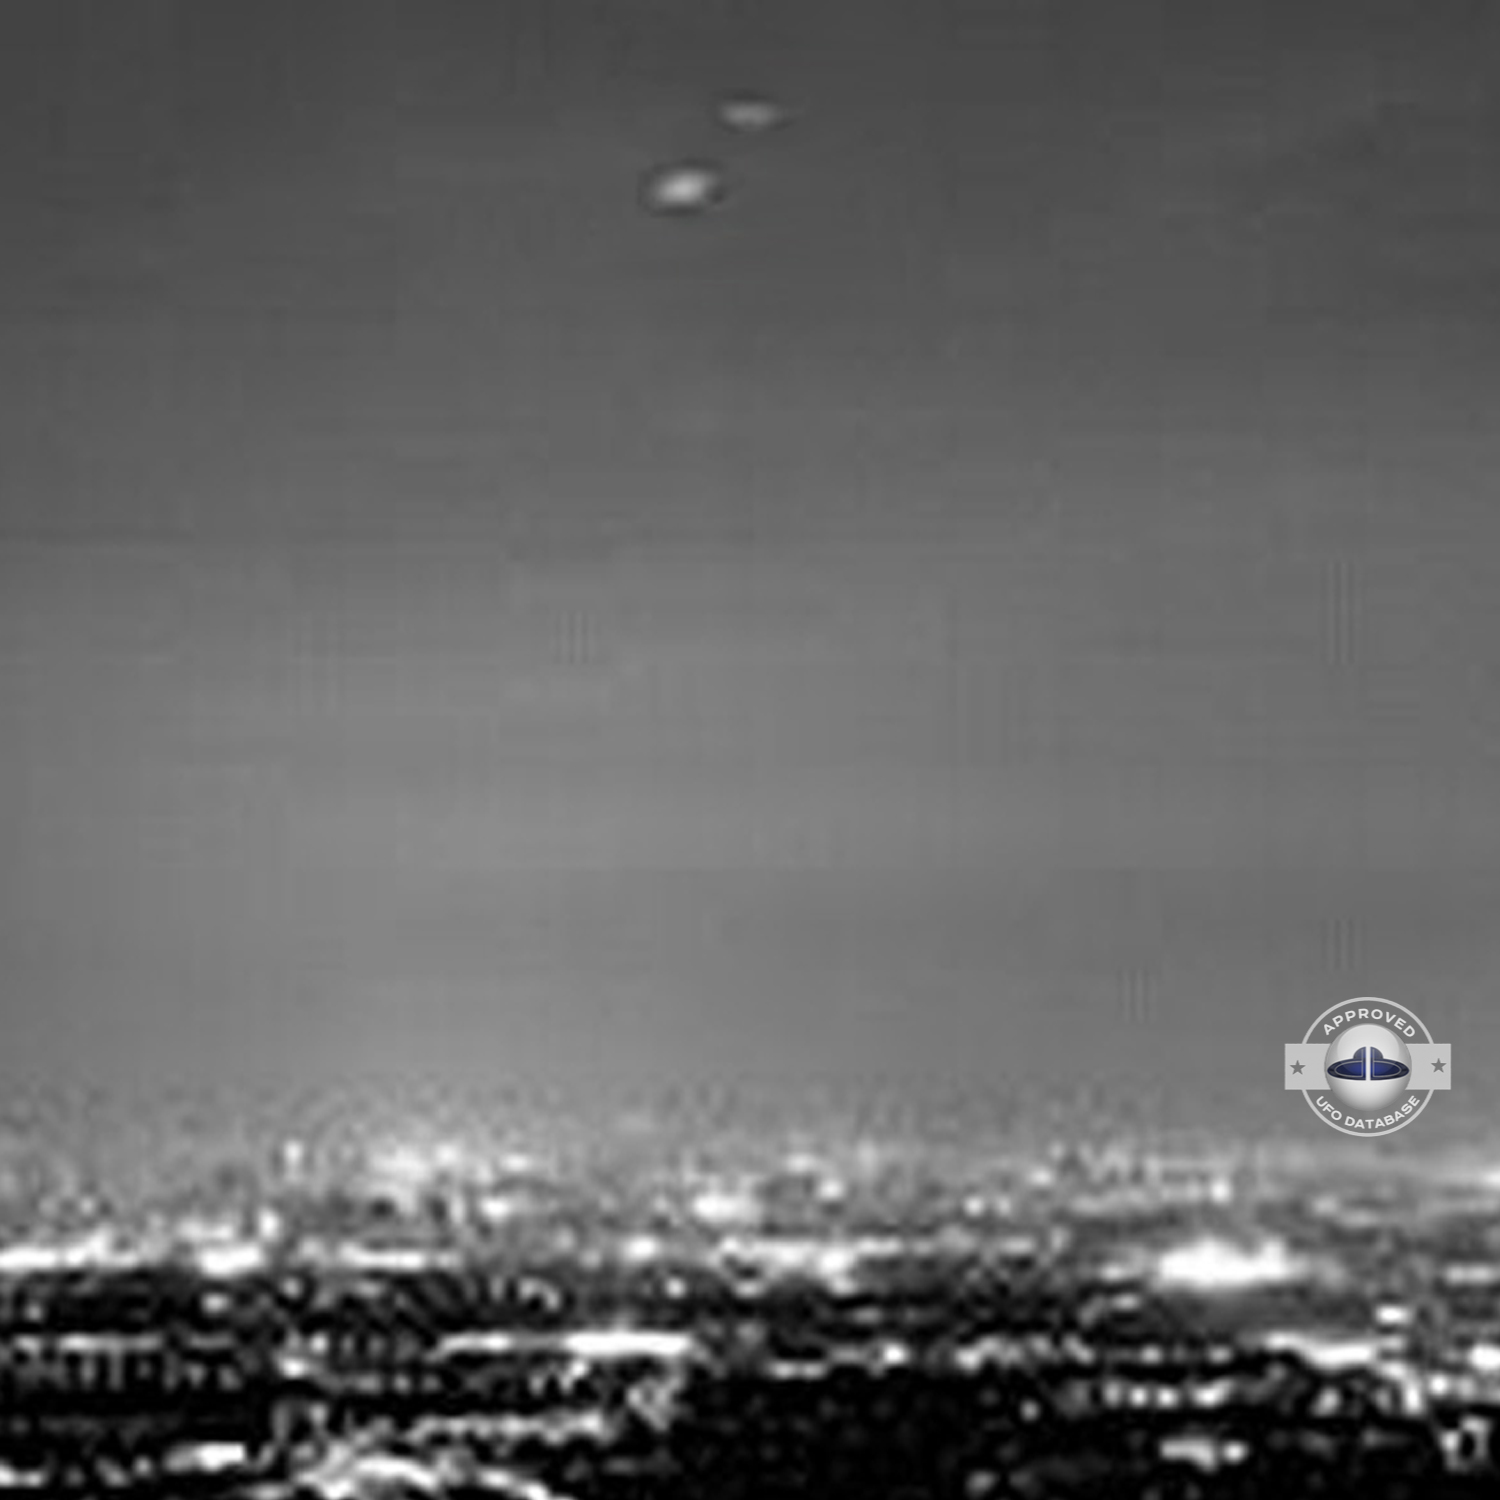 China UFO Sighting | Kunming, Yunnan UFO picture | October 14 2010 UFO Picture #151-3